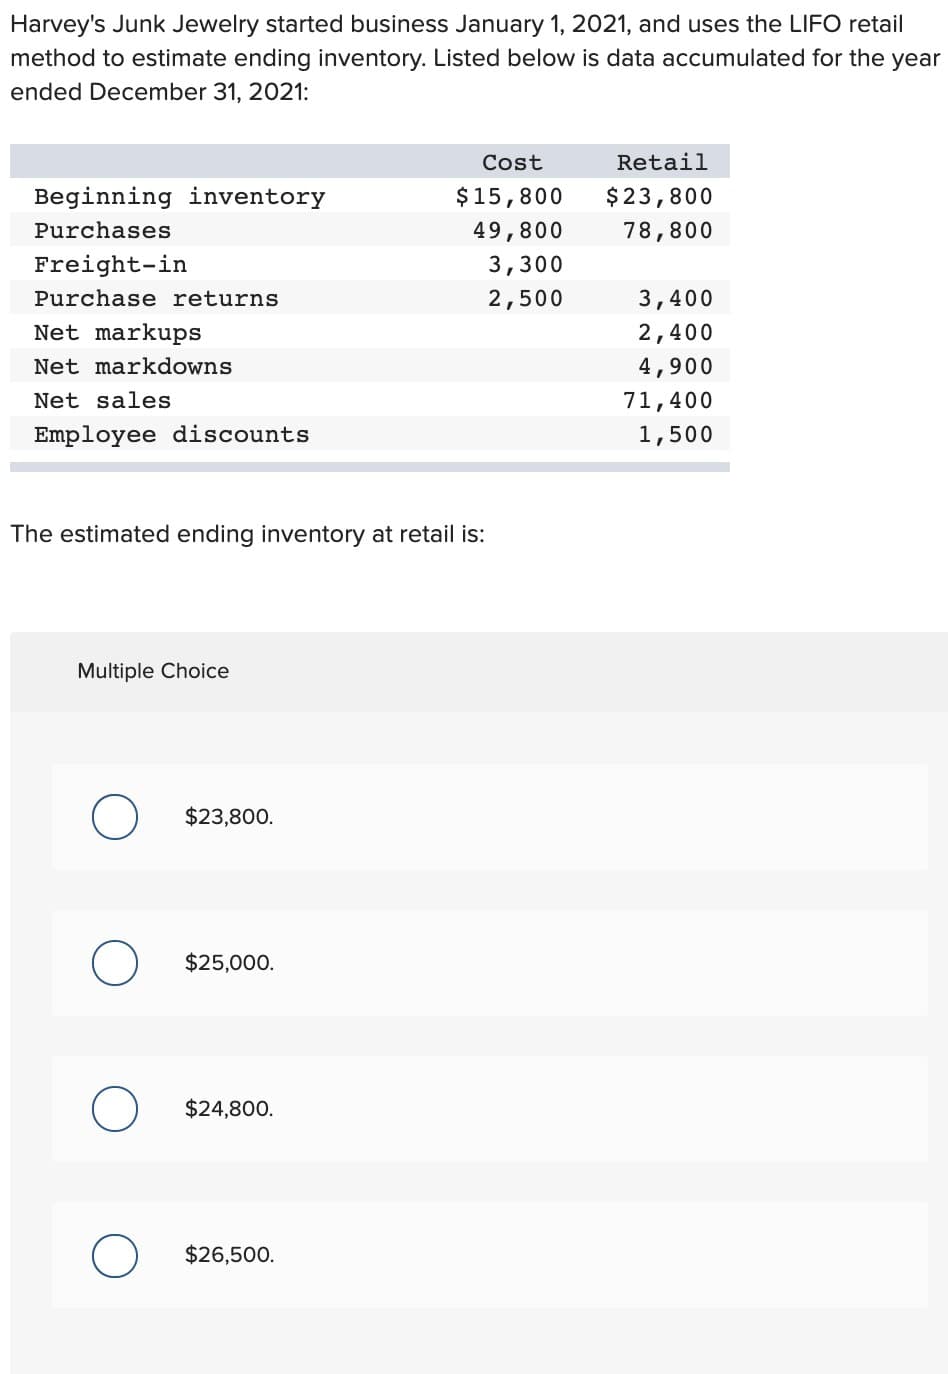 Harvey's Junk Jewelry started business January 1, 2021, and uses the LIFO retail
method to estimate ending inventory. Listed below is data accumulated for the year
ended December 31, 2021:
Cost
Retail
Beginning inventory
$15,800
$23,800
Purchases
49,800
78,800
Freight-in
3,300
Purchase returns
2,500
3,400
Net markups
2,400
Net markdowns
4,900
Net sales
Employee discounts
71,400
1,500
The estimated ending inventory at retail is:
Multiple Choice
○ $23,800.
о
$25,000.
○ $24,800.
$26,500.